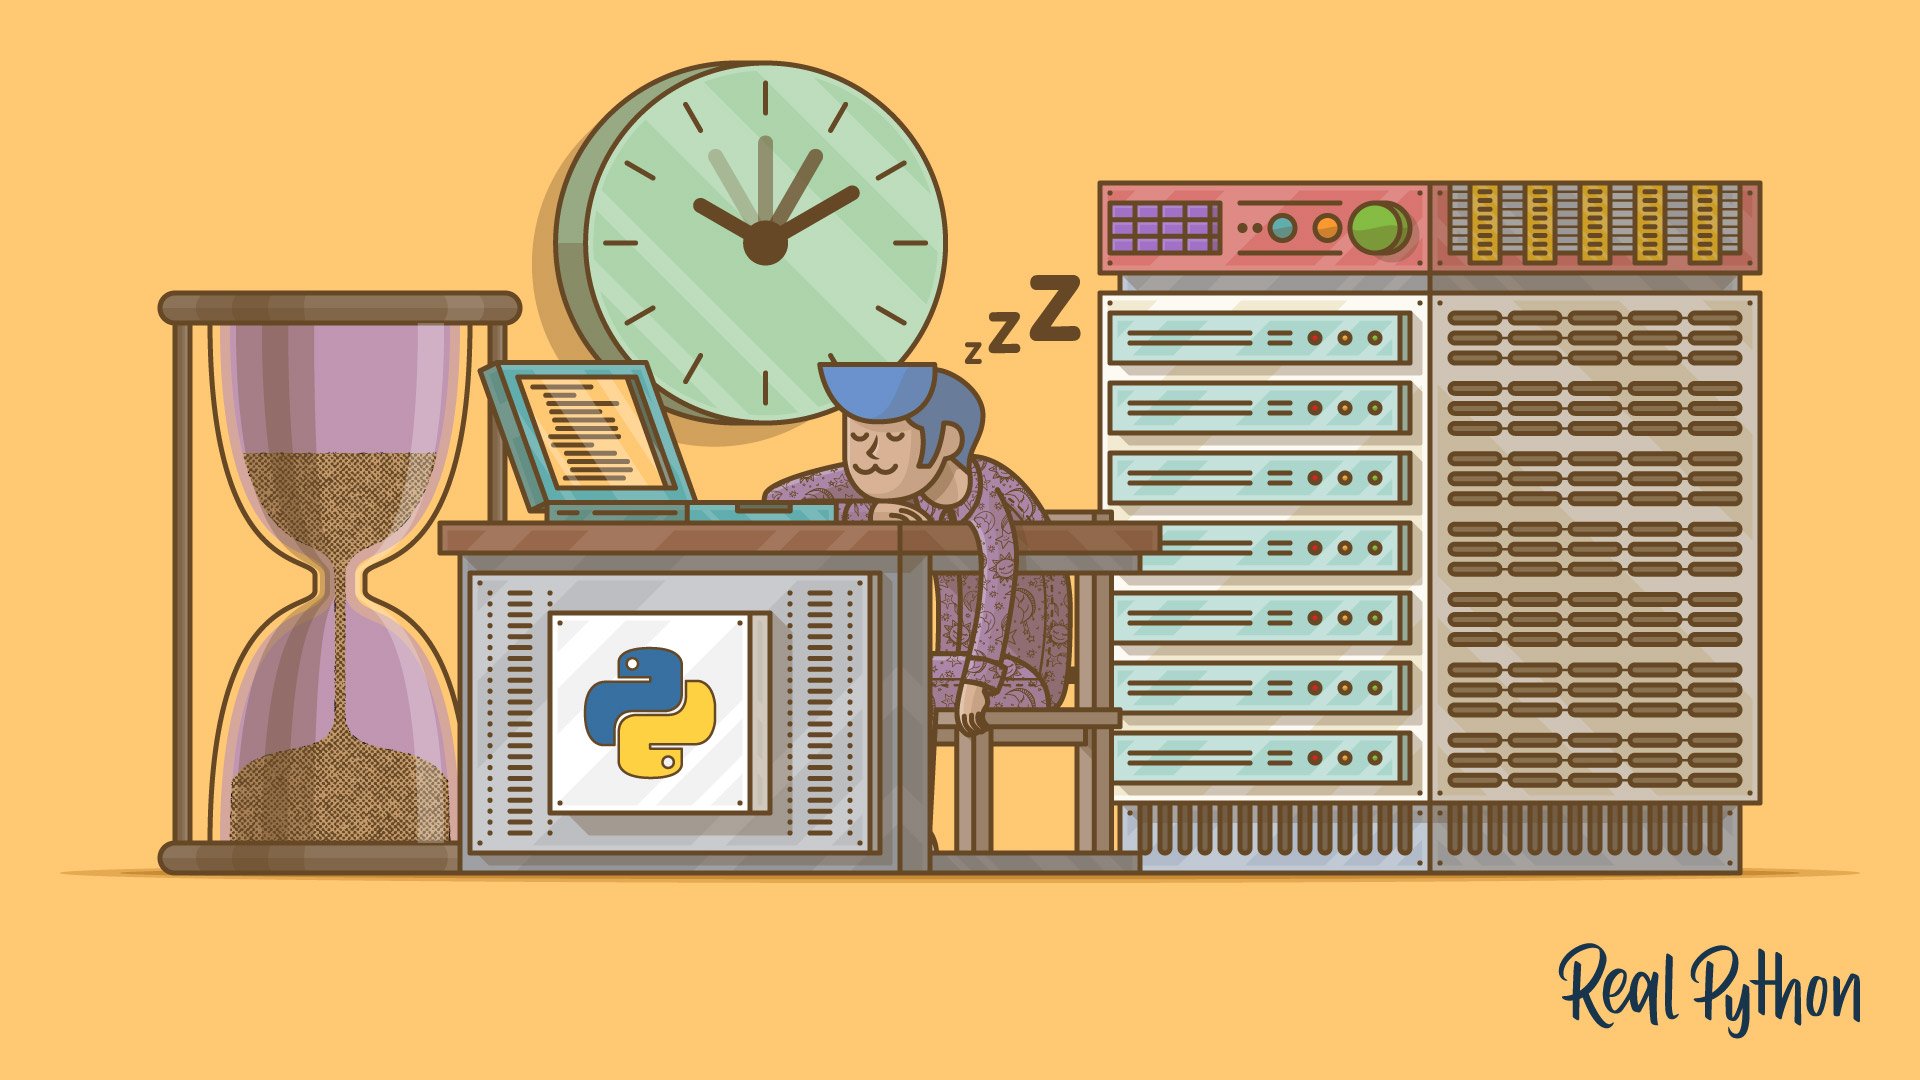 Python sleep(): How to Add Time Delays to Your Code